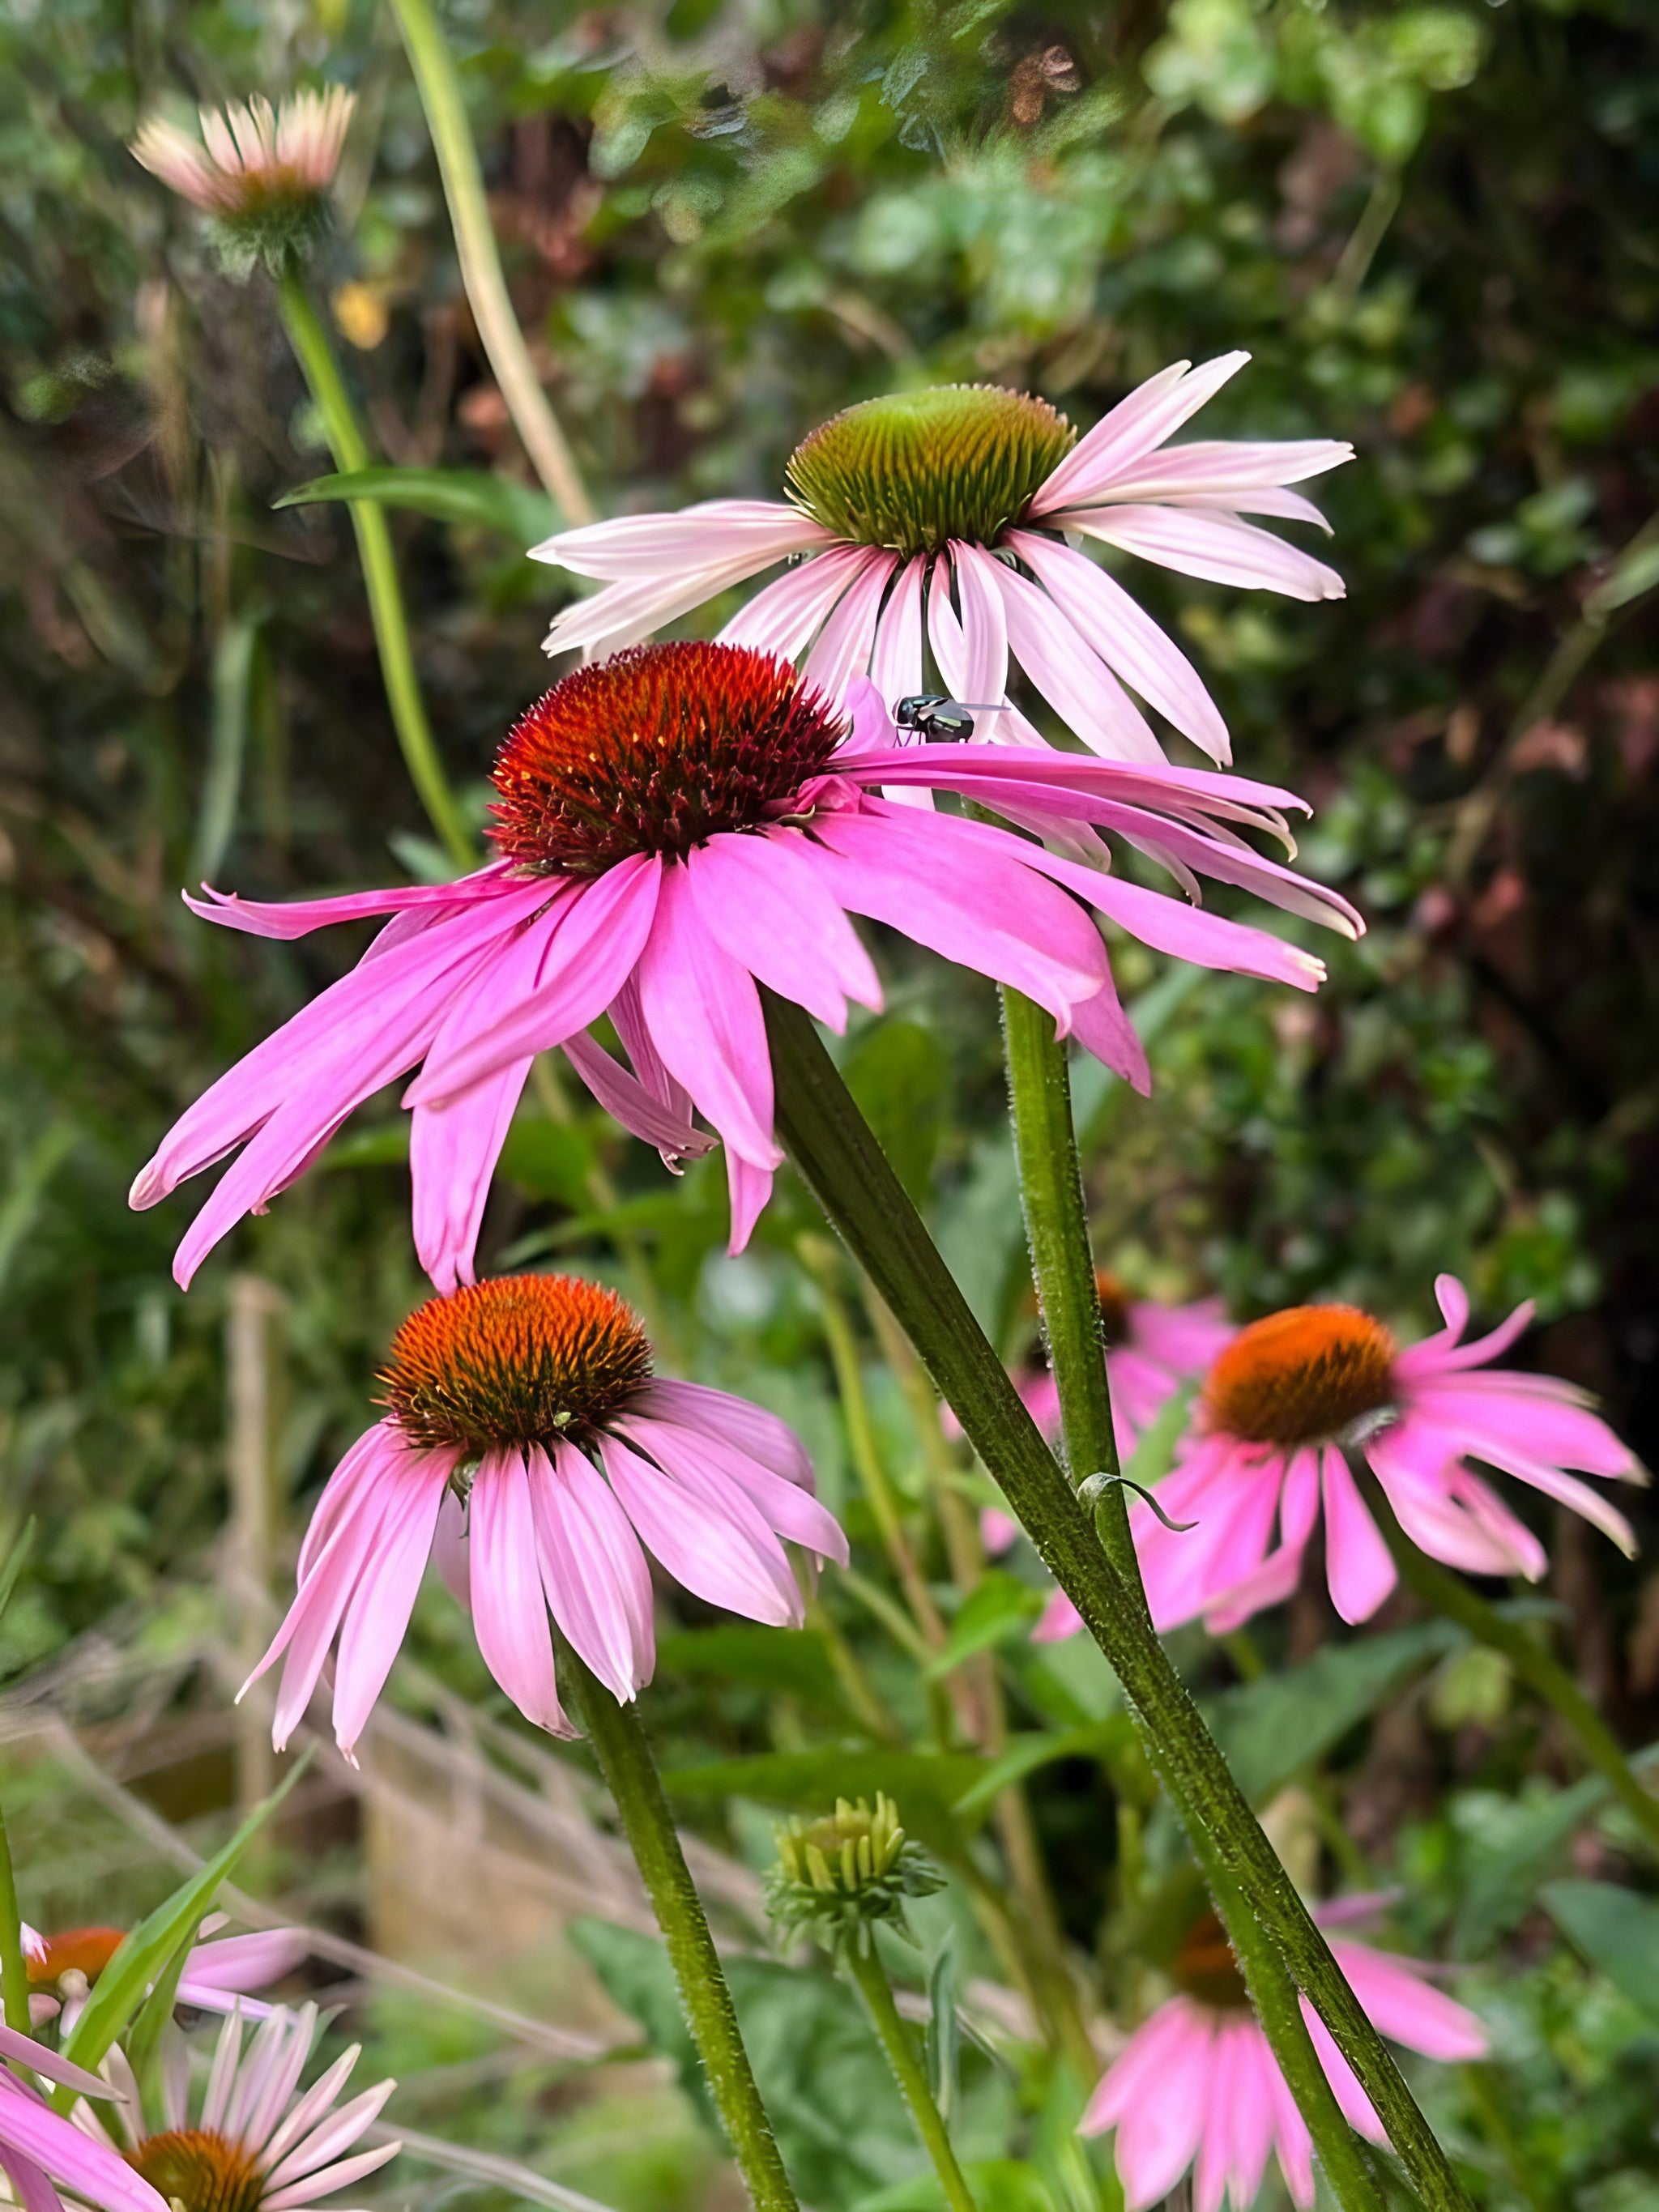 Echinacea Purple Coneflower blossoming in a garden setting